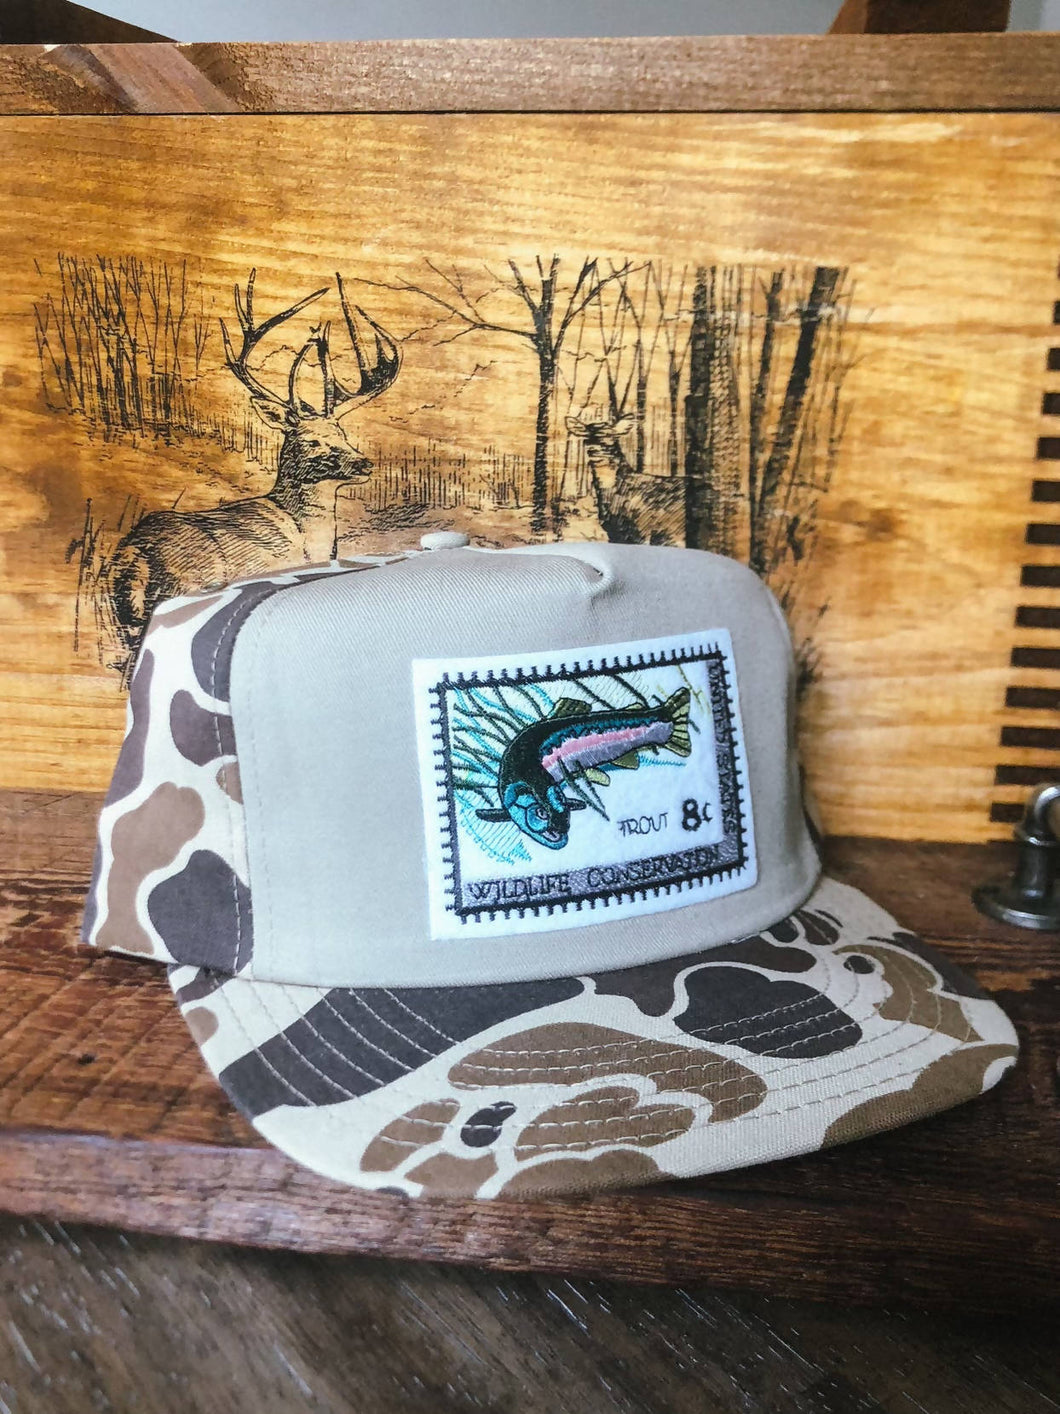 1971 8¢ Trout US Postage Stamp Hat